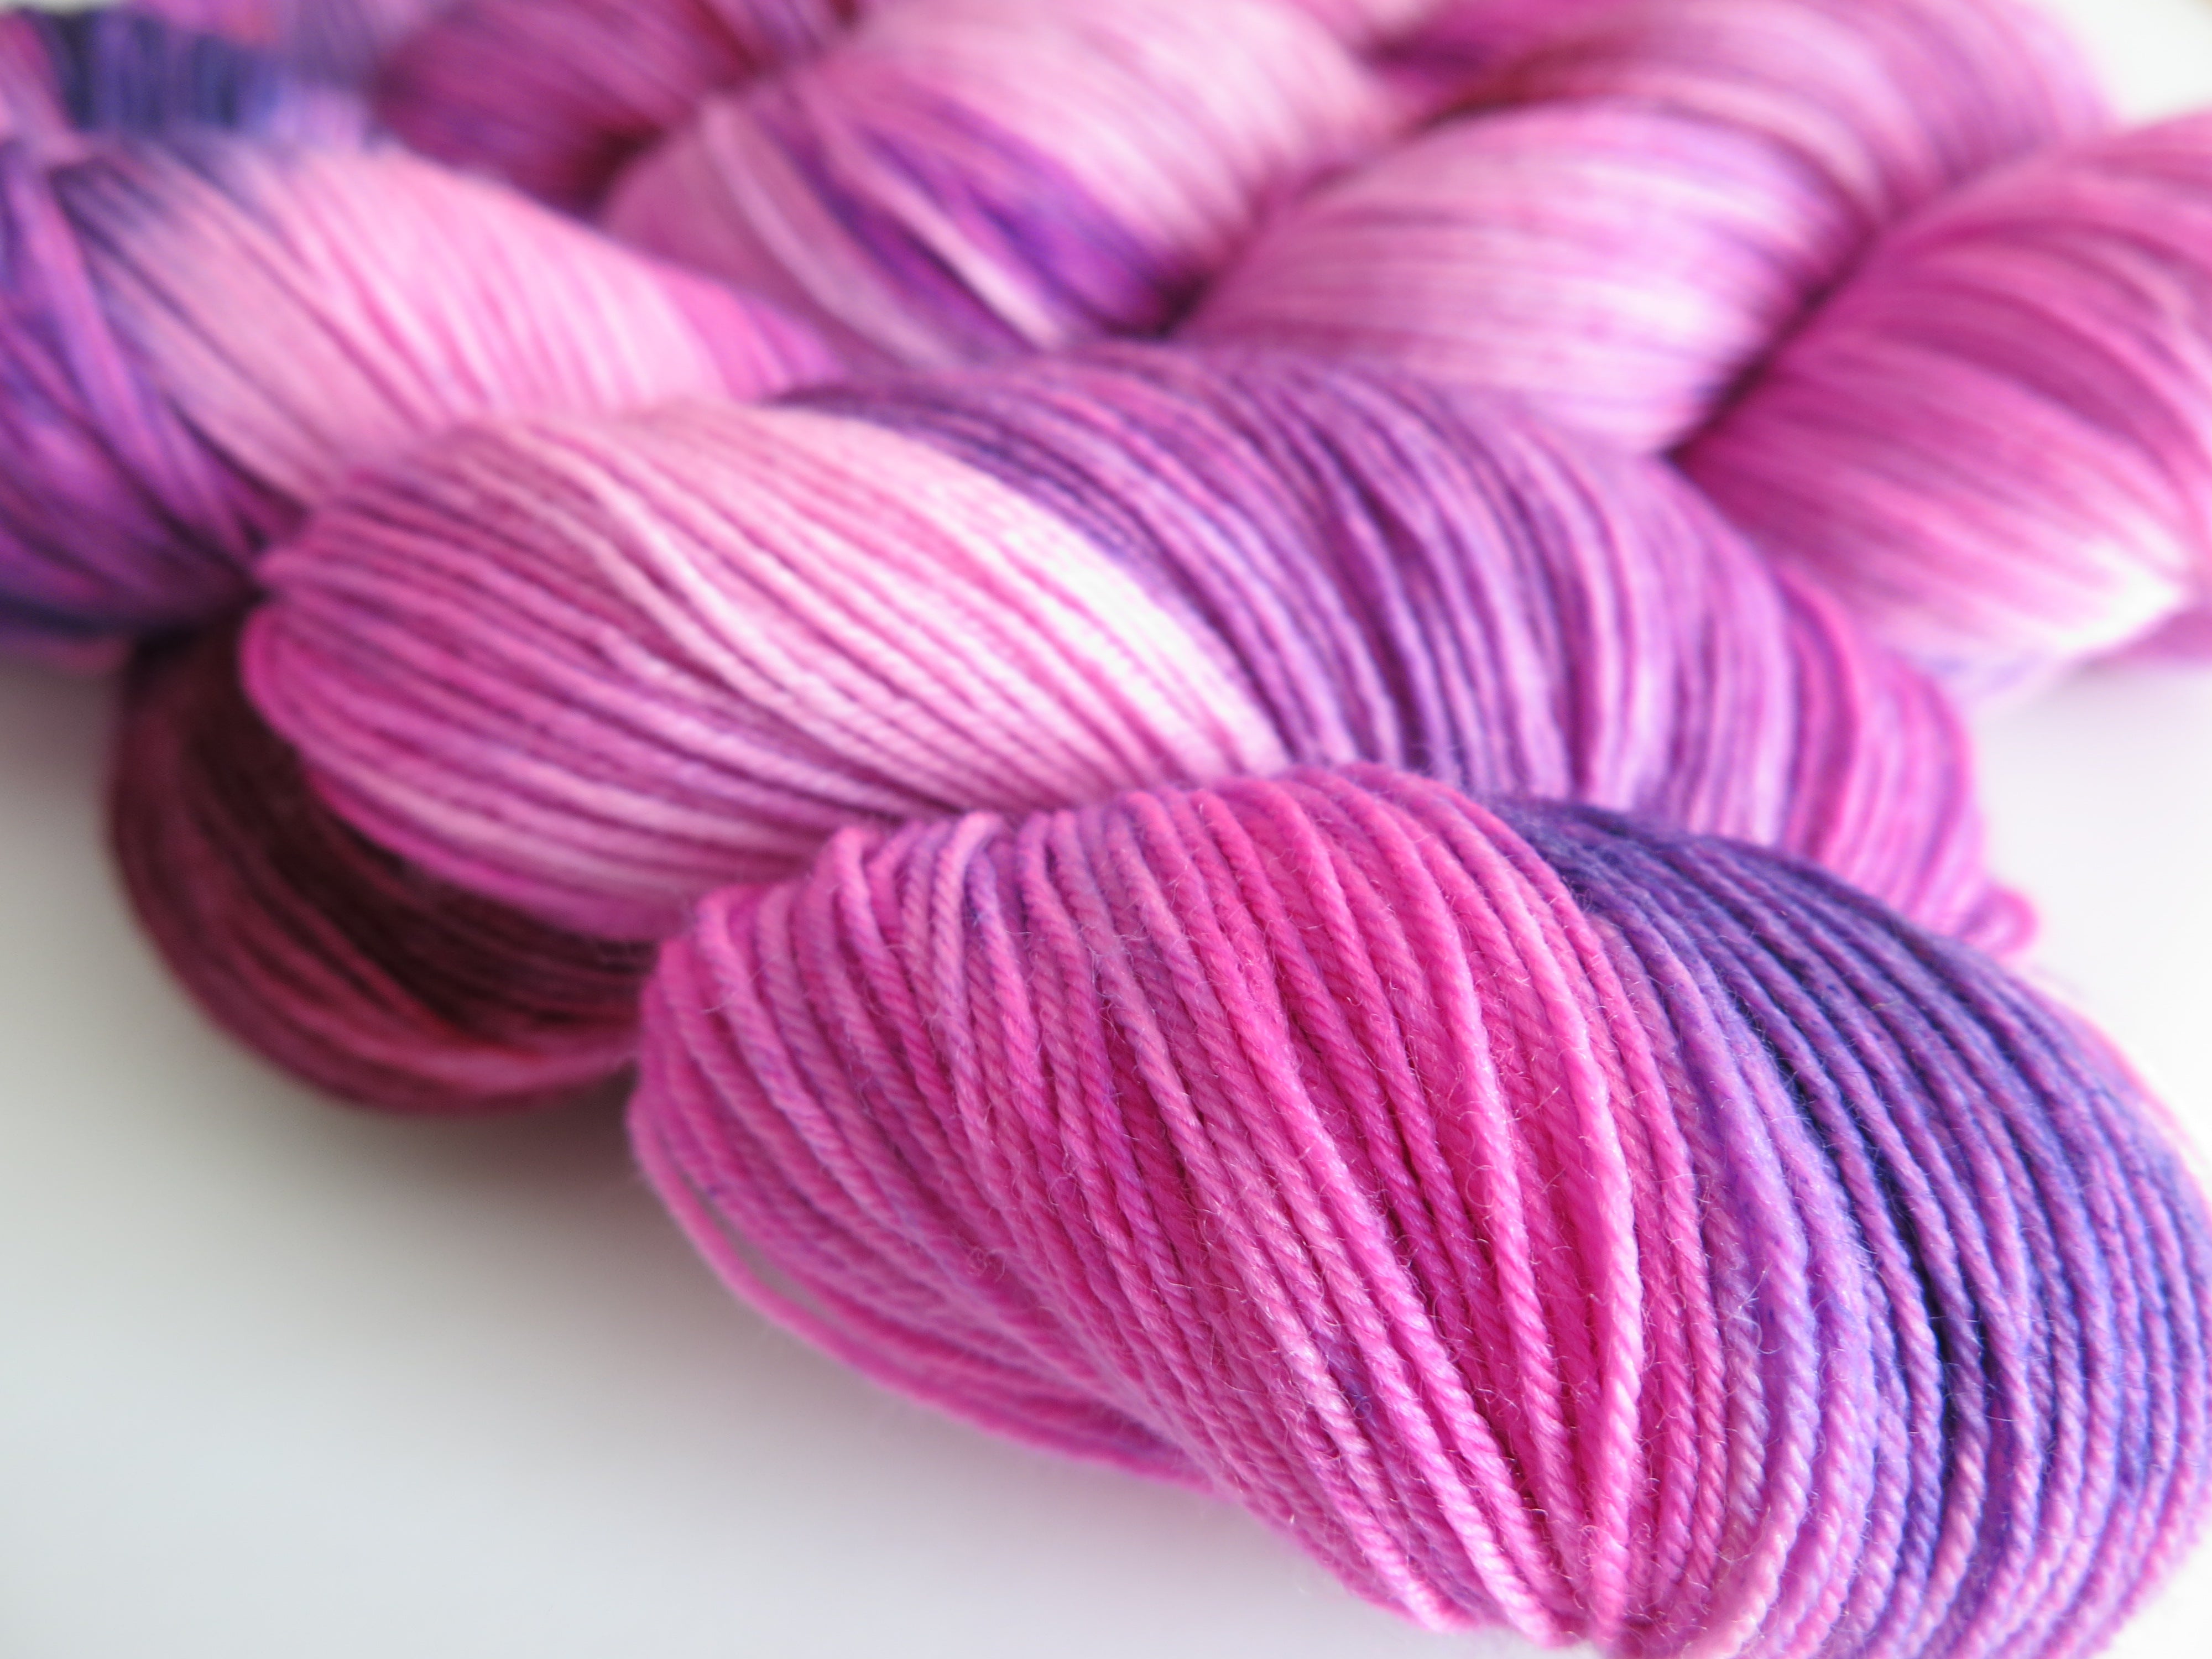 uv reactive pink and purple sock yarn skein for knitting